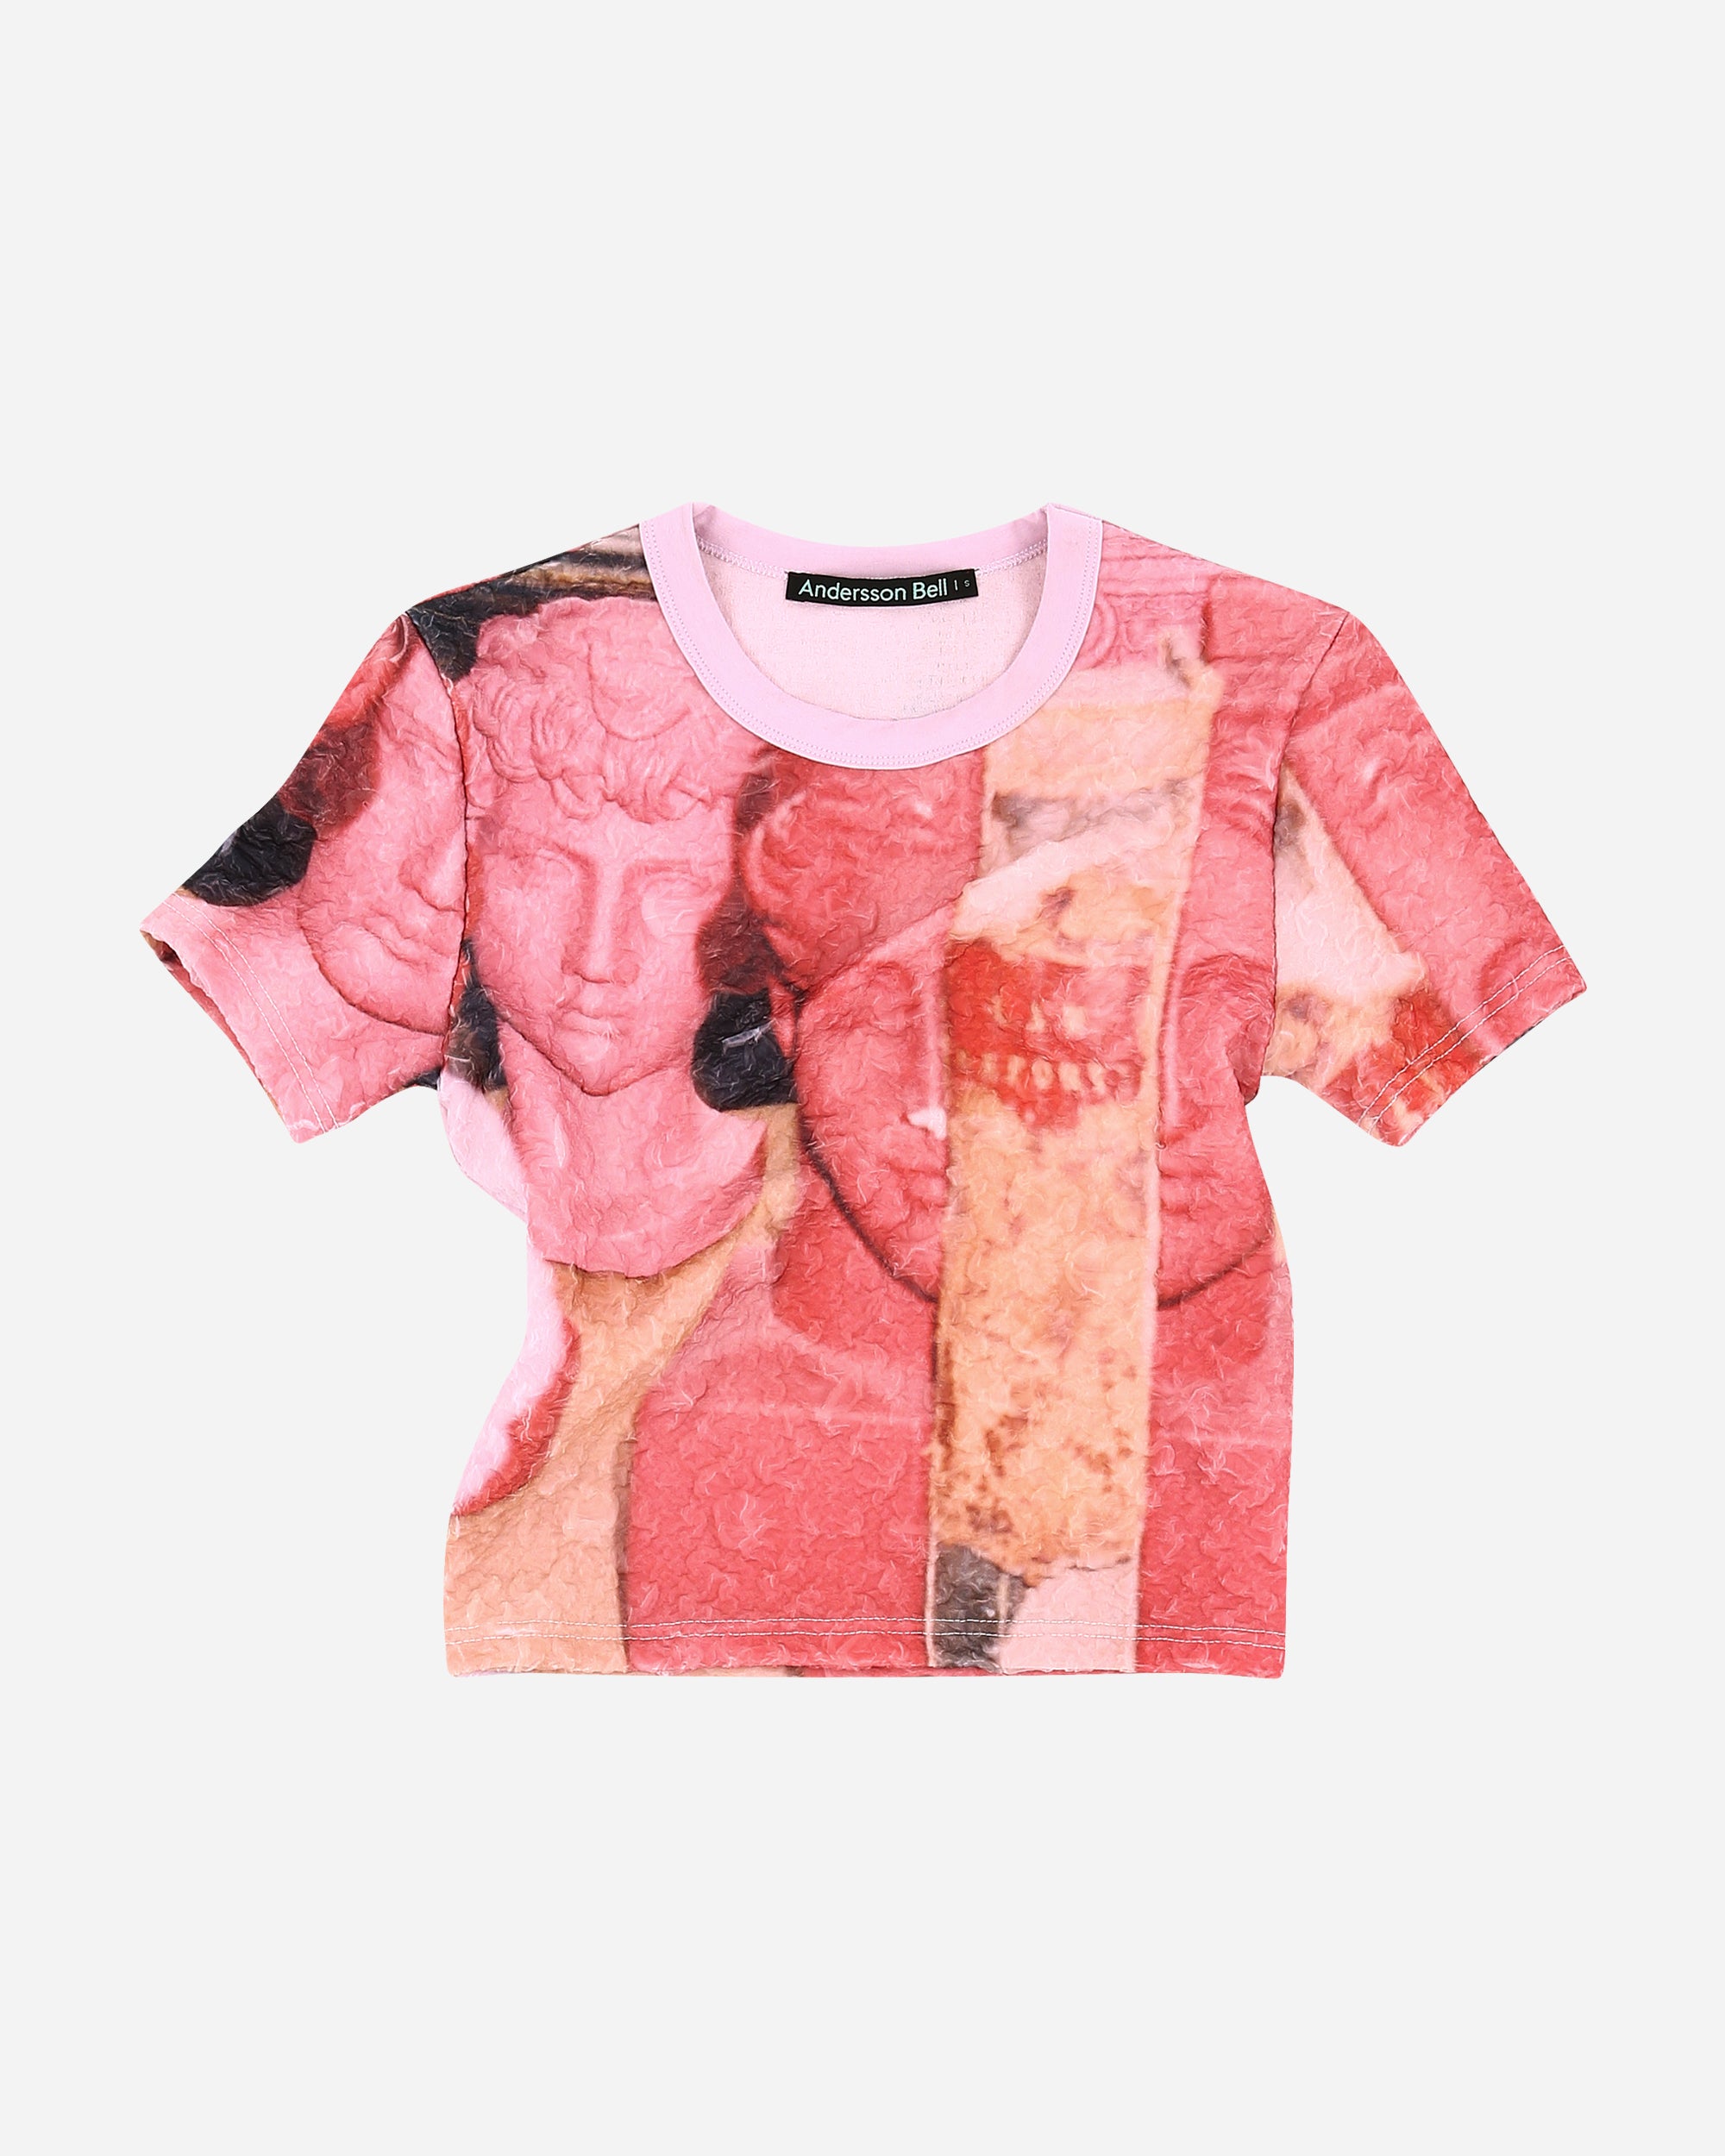 Andersson Bell David Chiffon Crinkle T-shirt PINK atb967w